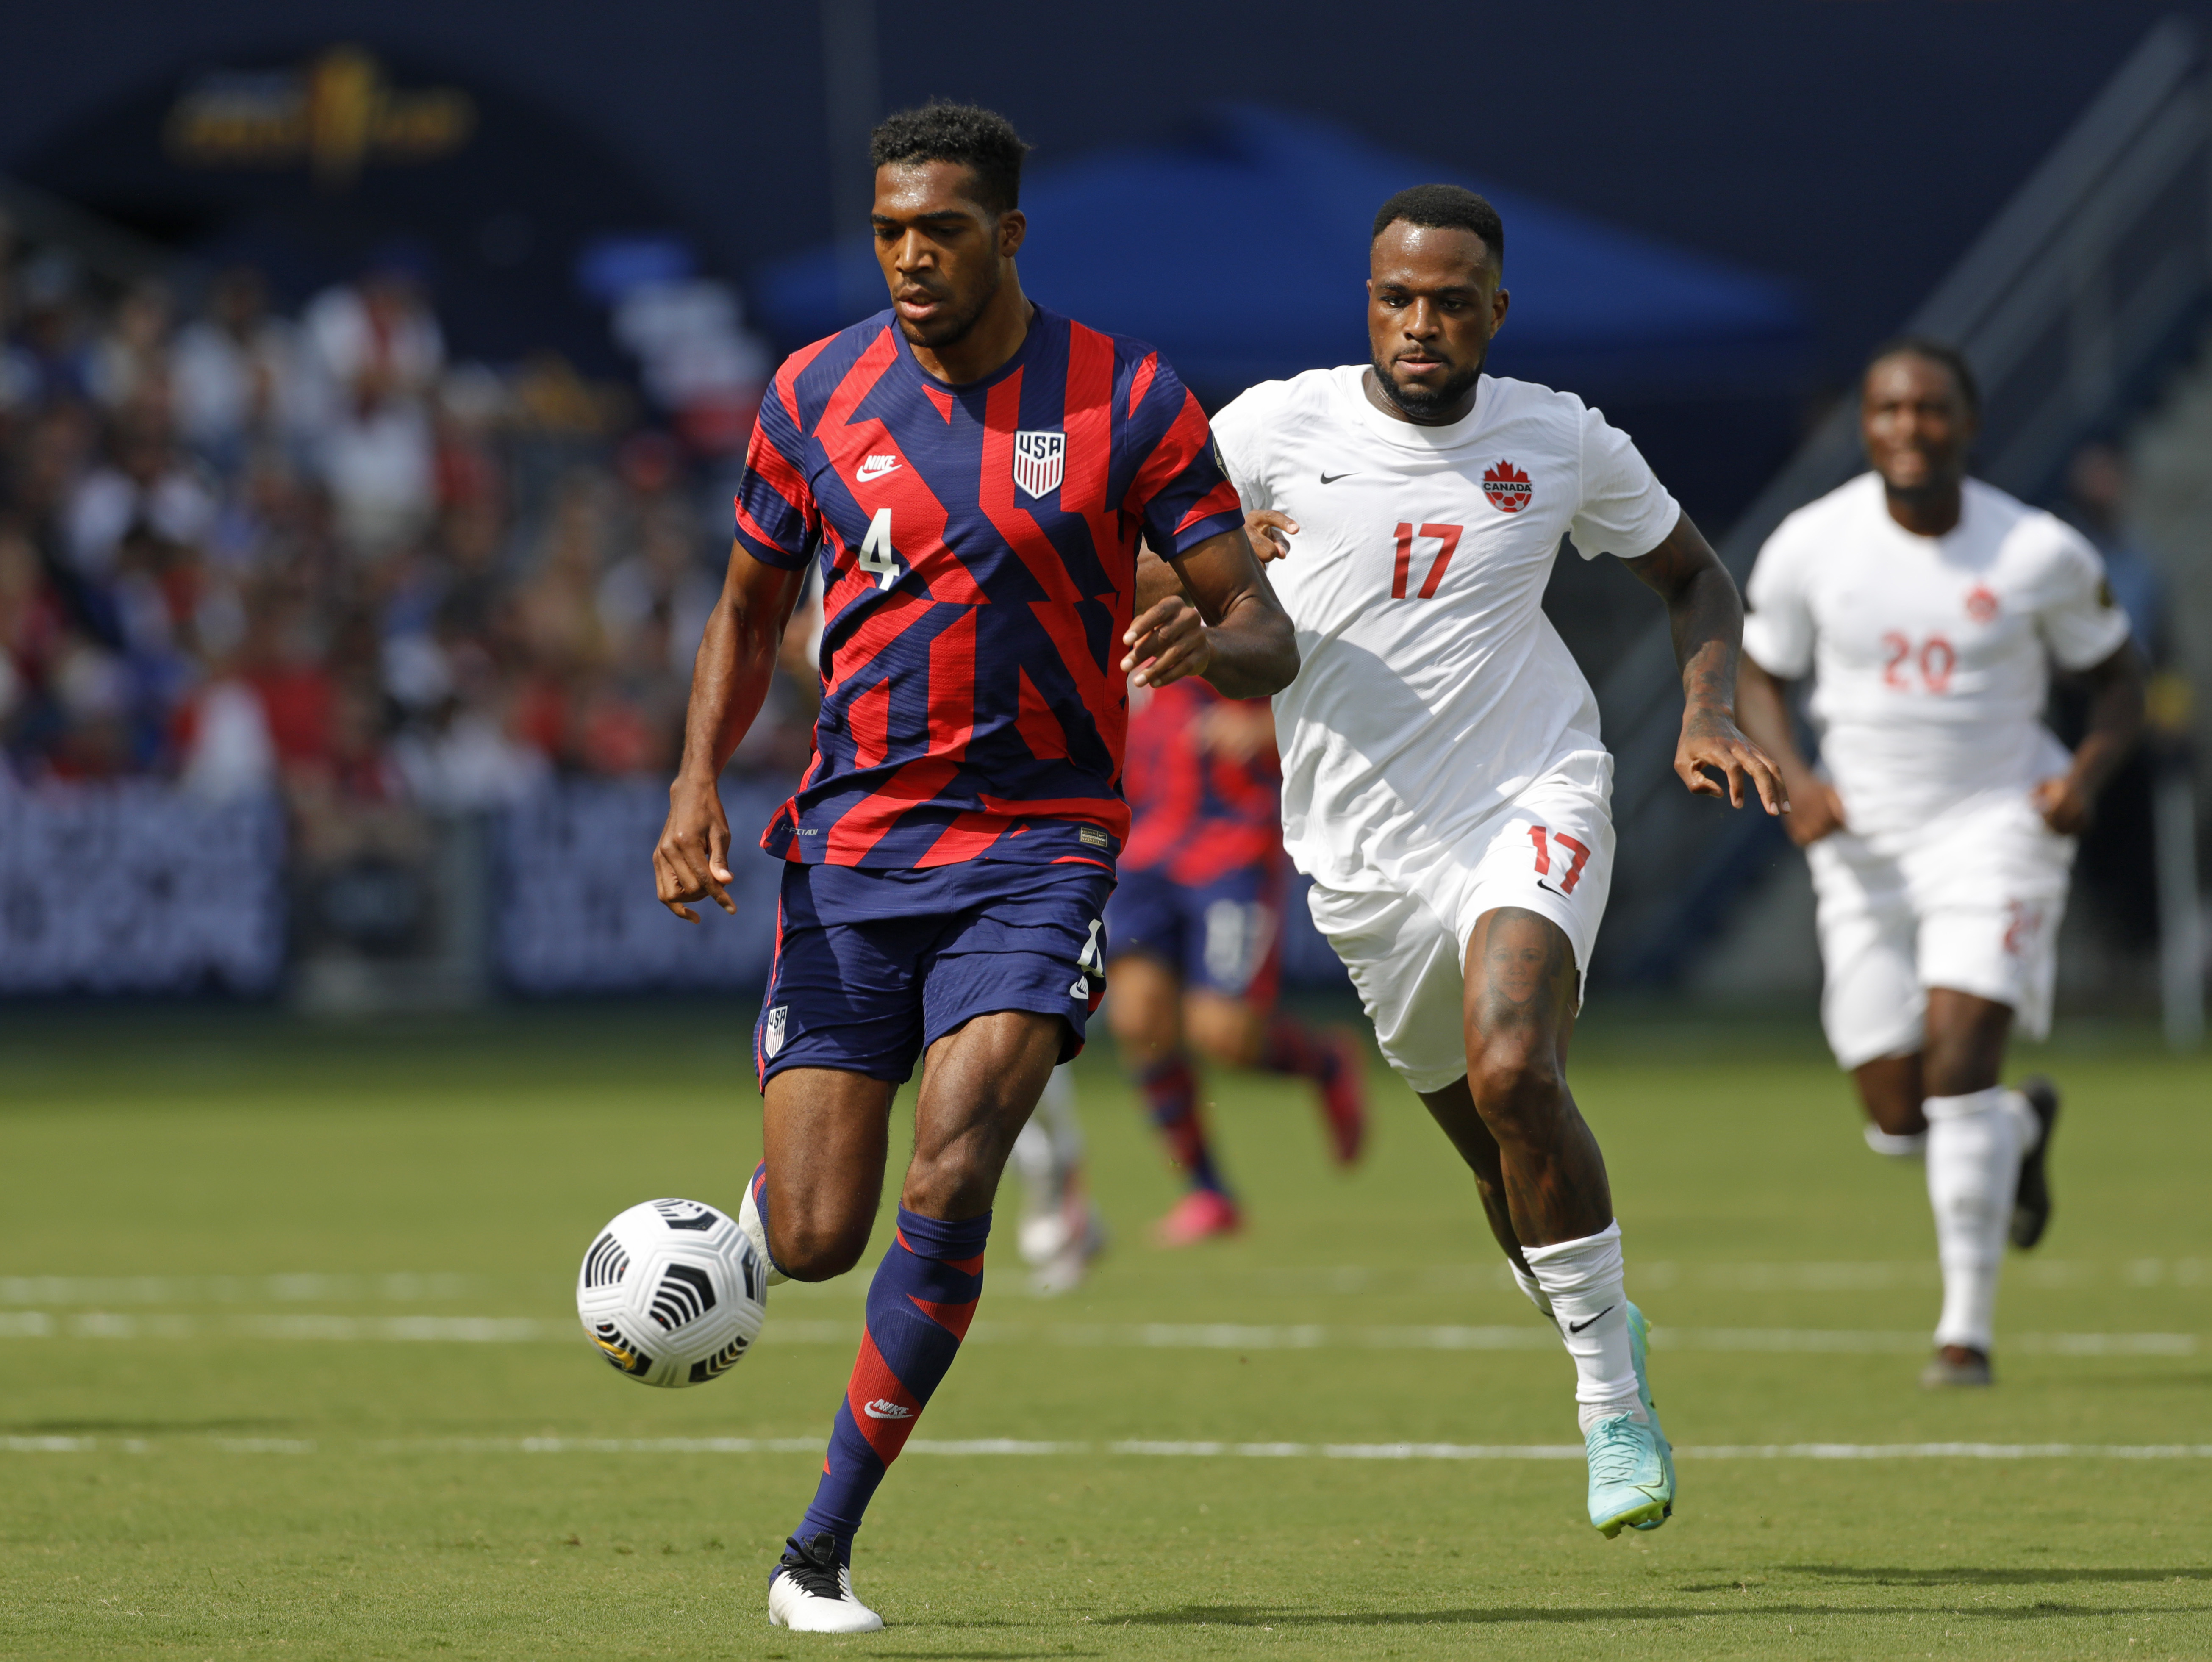 USA men-Jamaica 2021 Concacaf Gold Cup live stream (7/25) How to watch online, TV, time